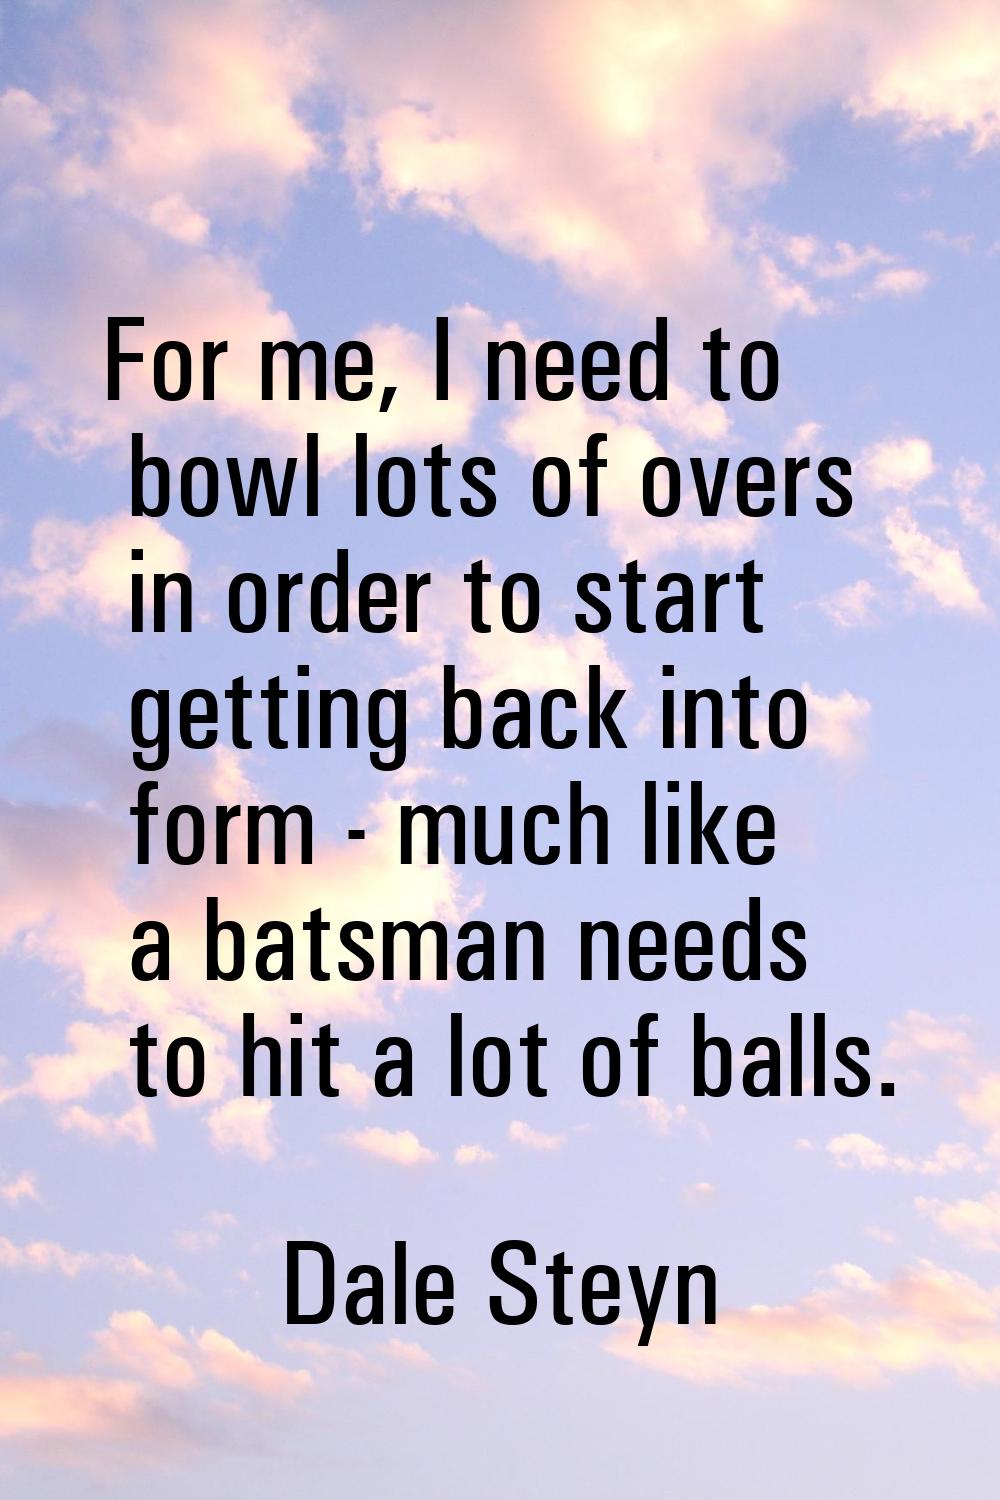 For me, I need to bowl lots of overs in order to start getting back into form - much like a batsman